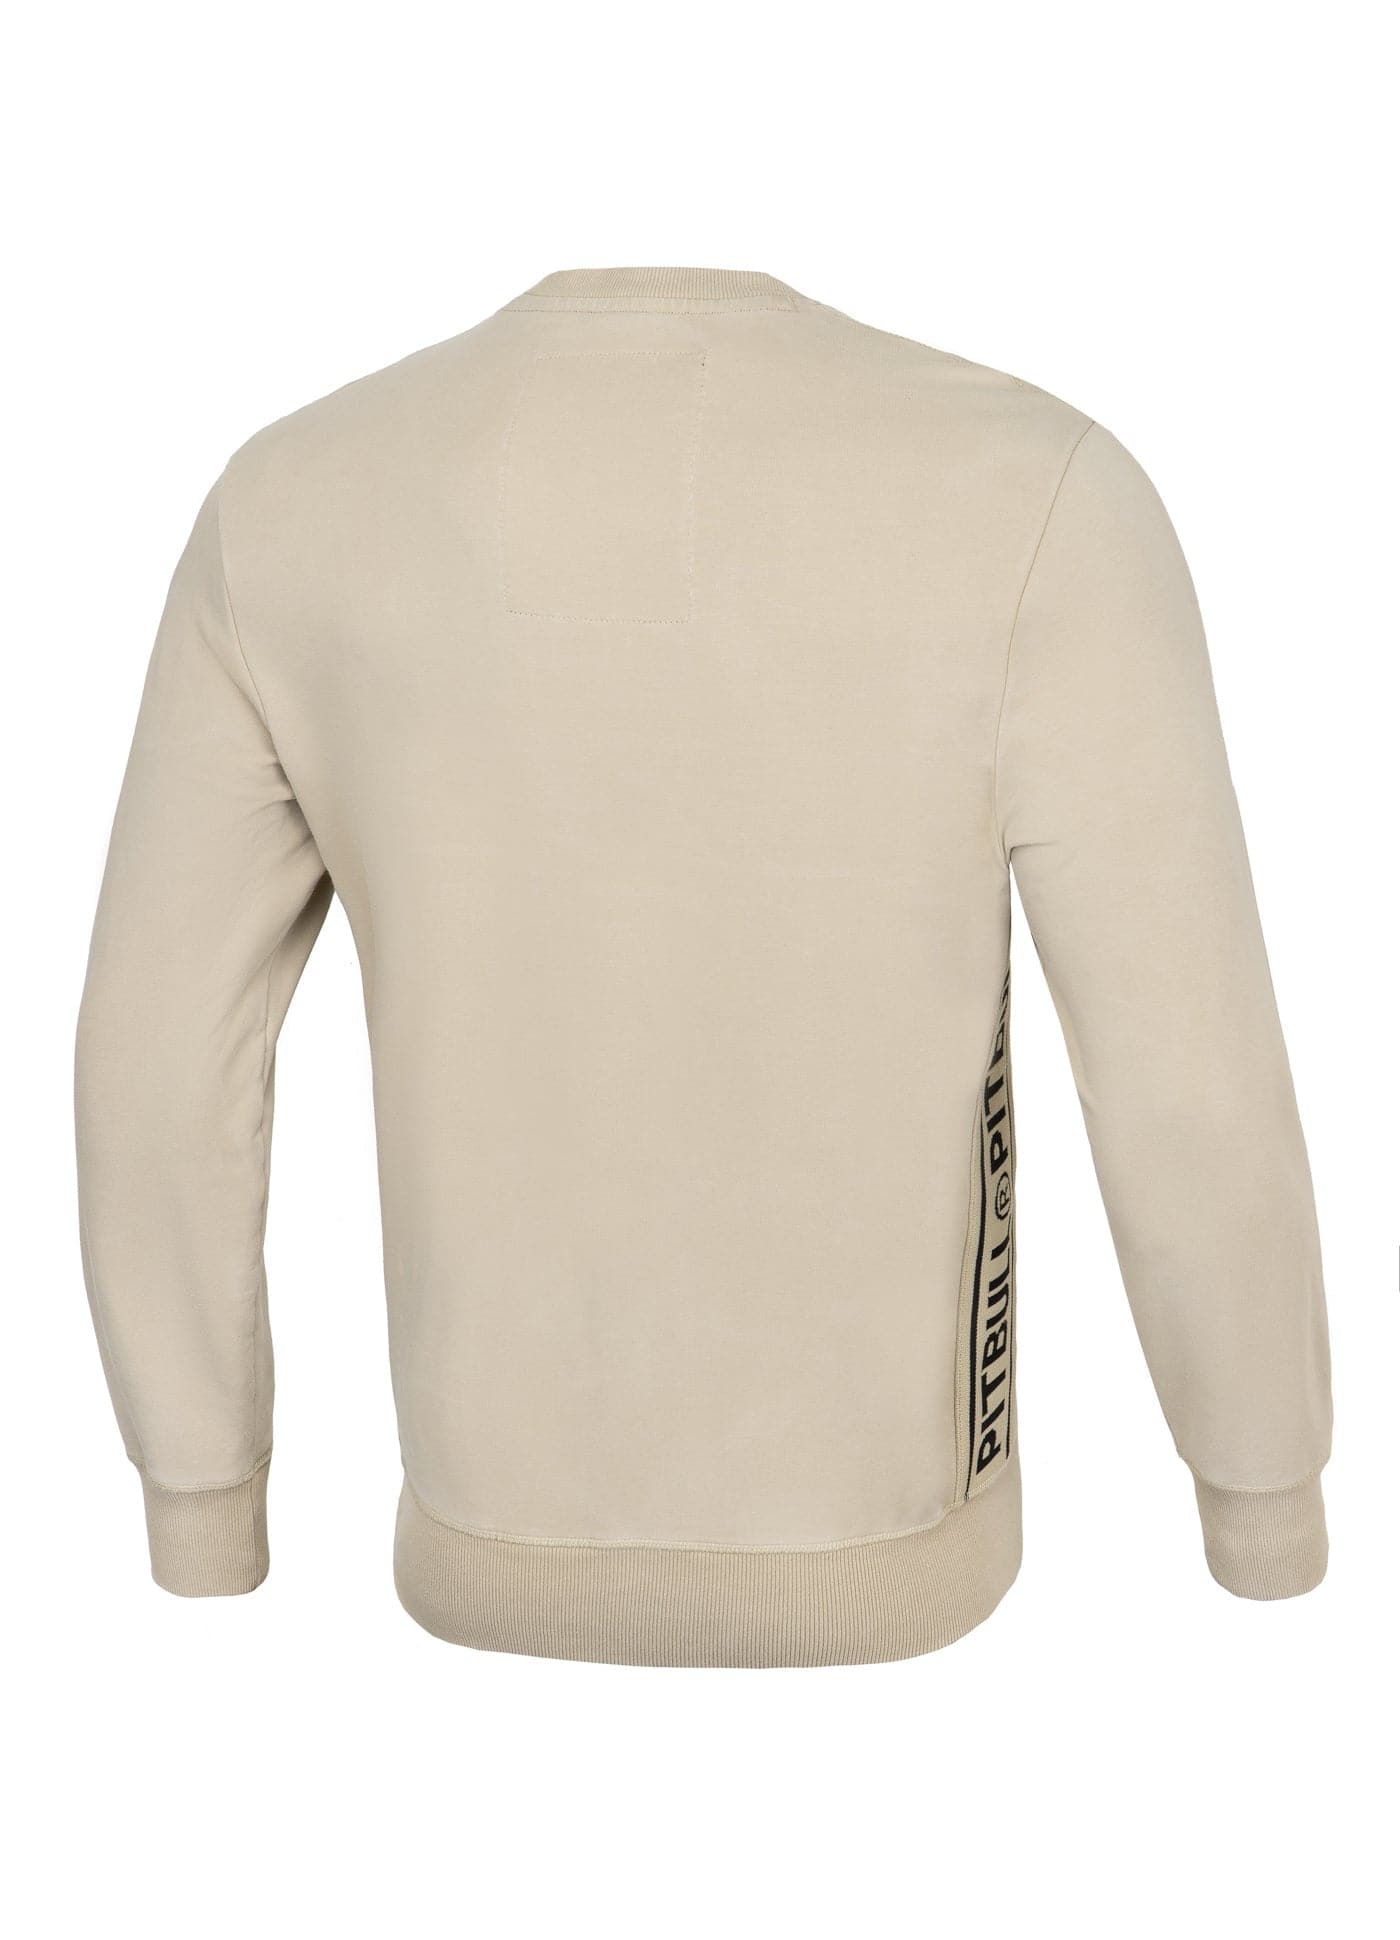 ALBION French Terry Sand Crewneck